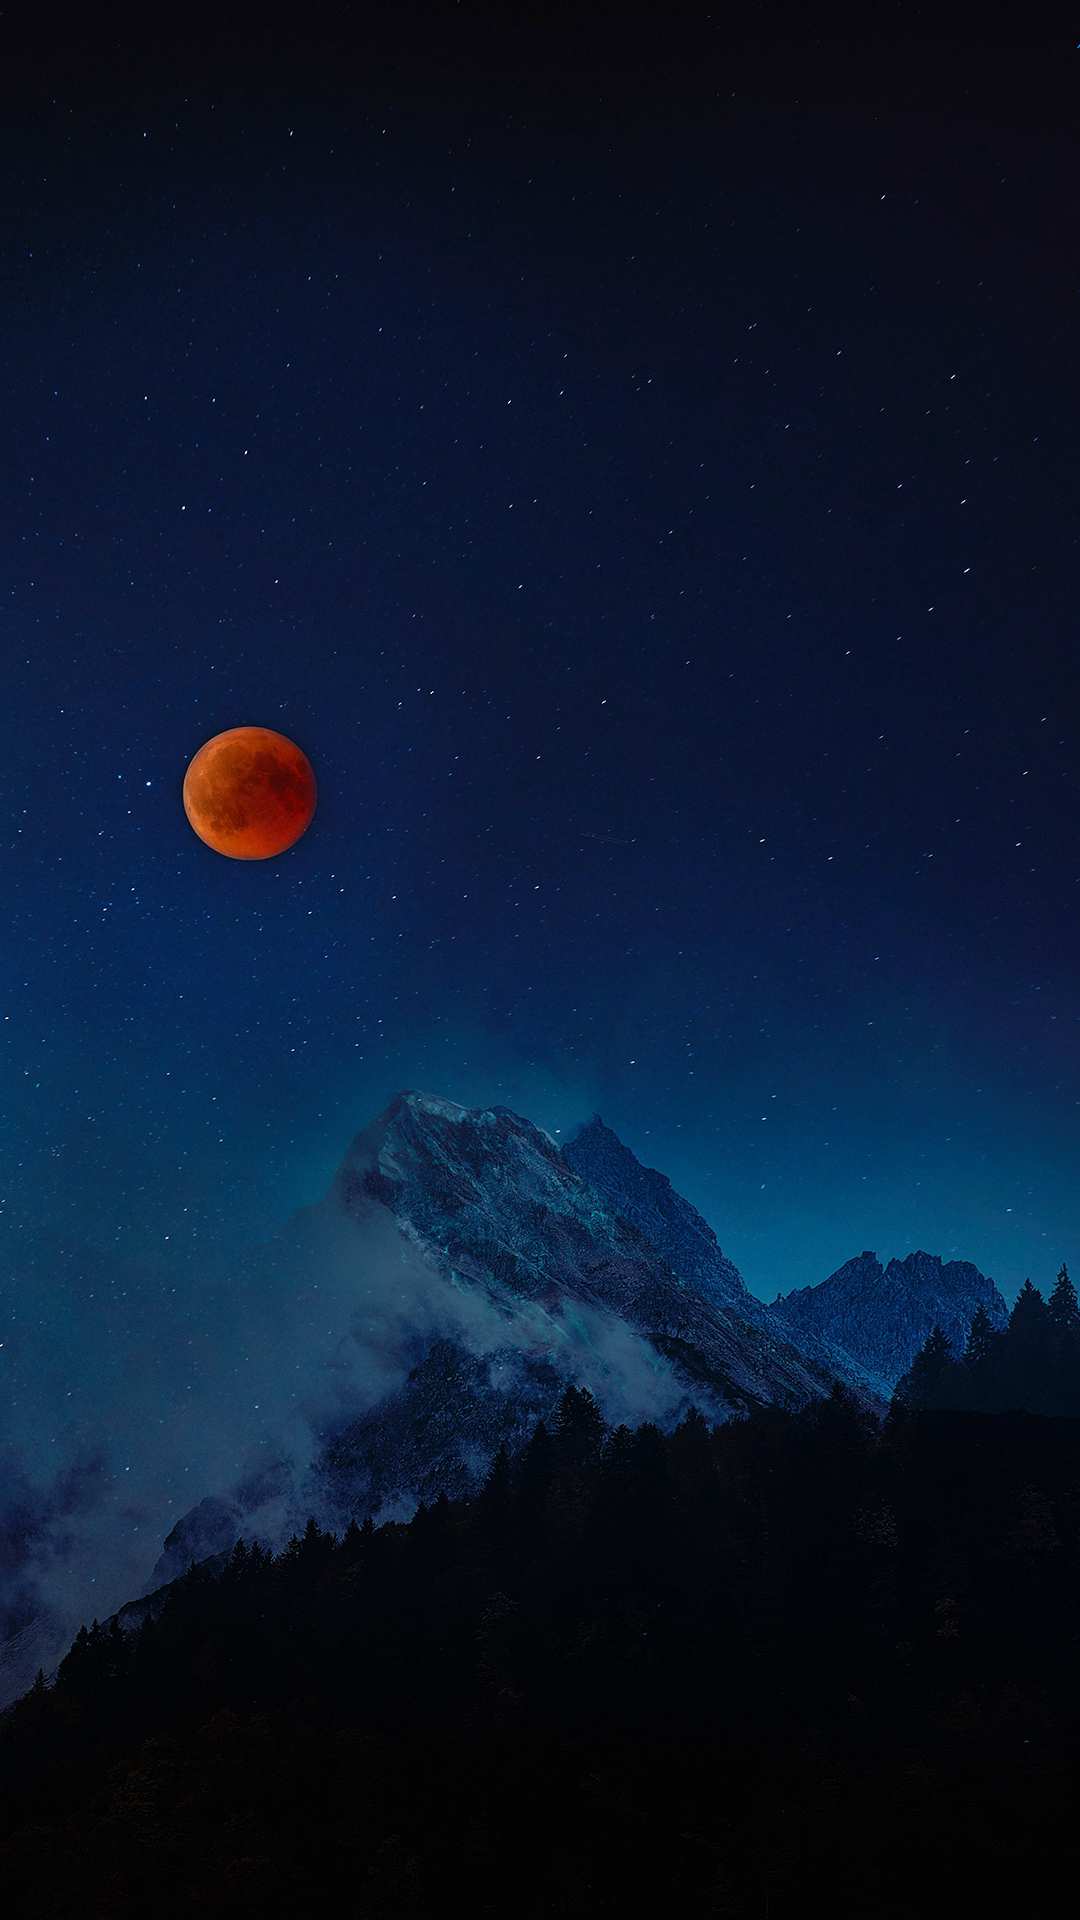 Red Moon iPhone Wallpaper - iPhone Wallpapers : iPhone Wallpapers